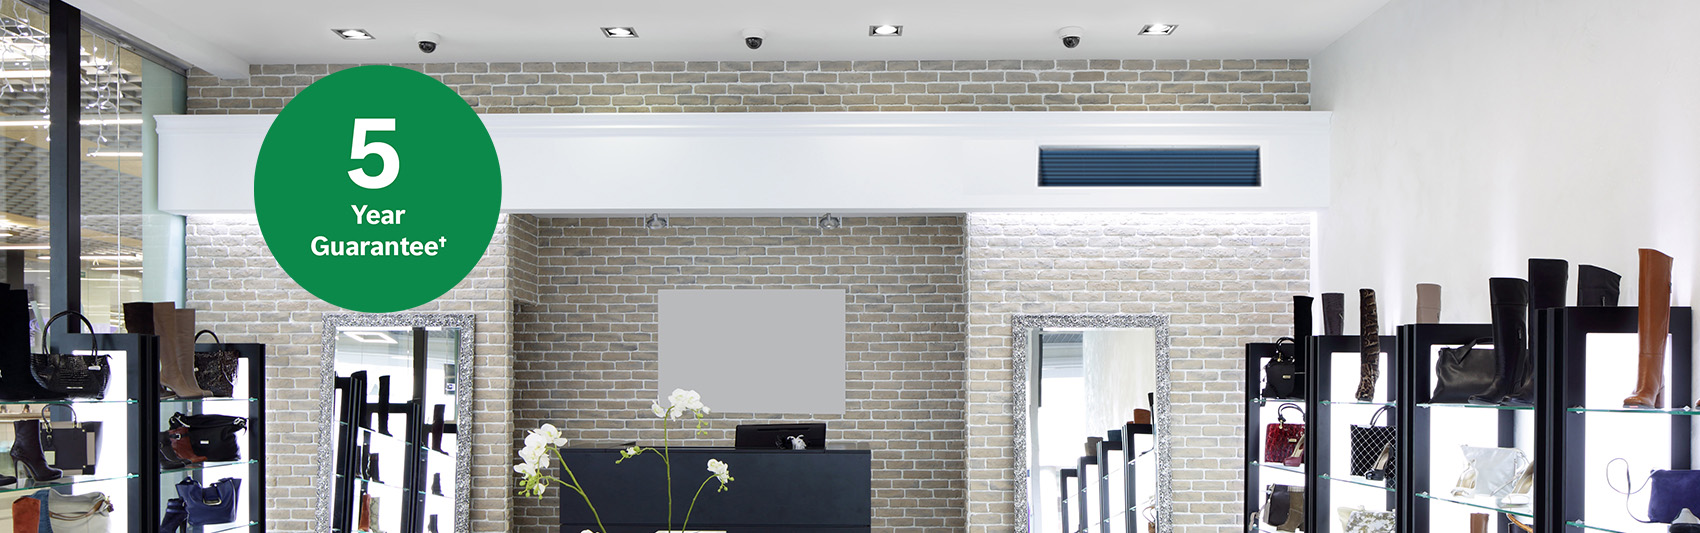 Bosch Split Air Conditioning Concealed Units